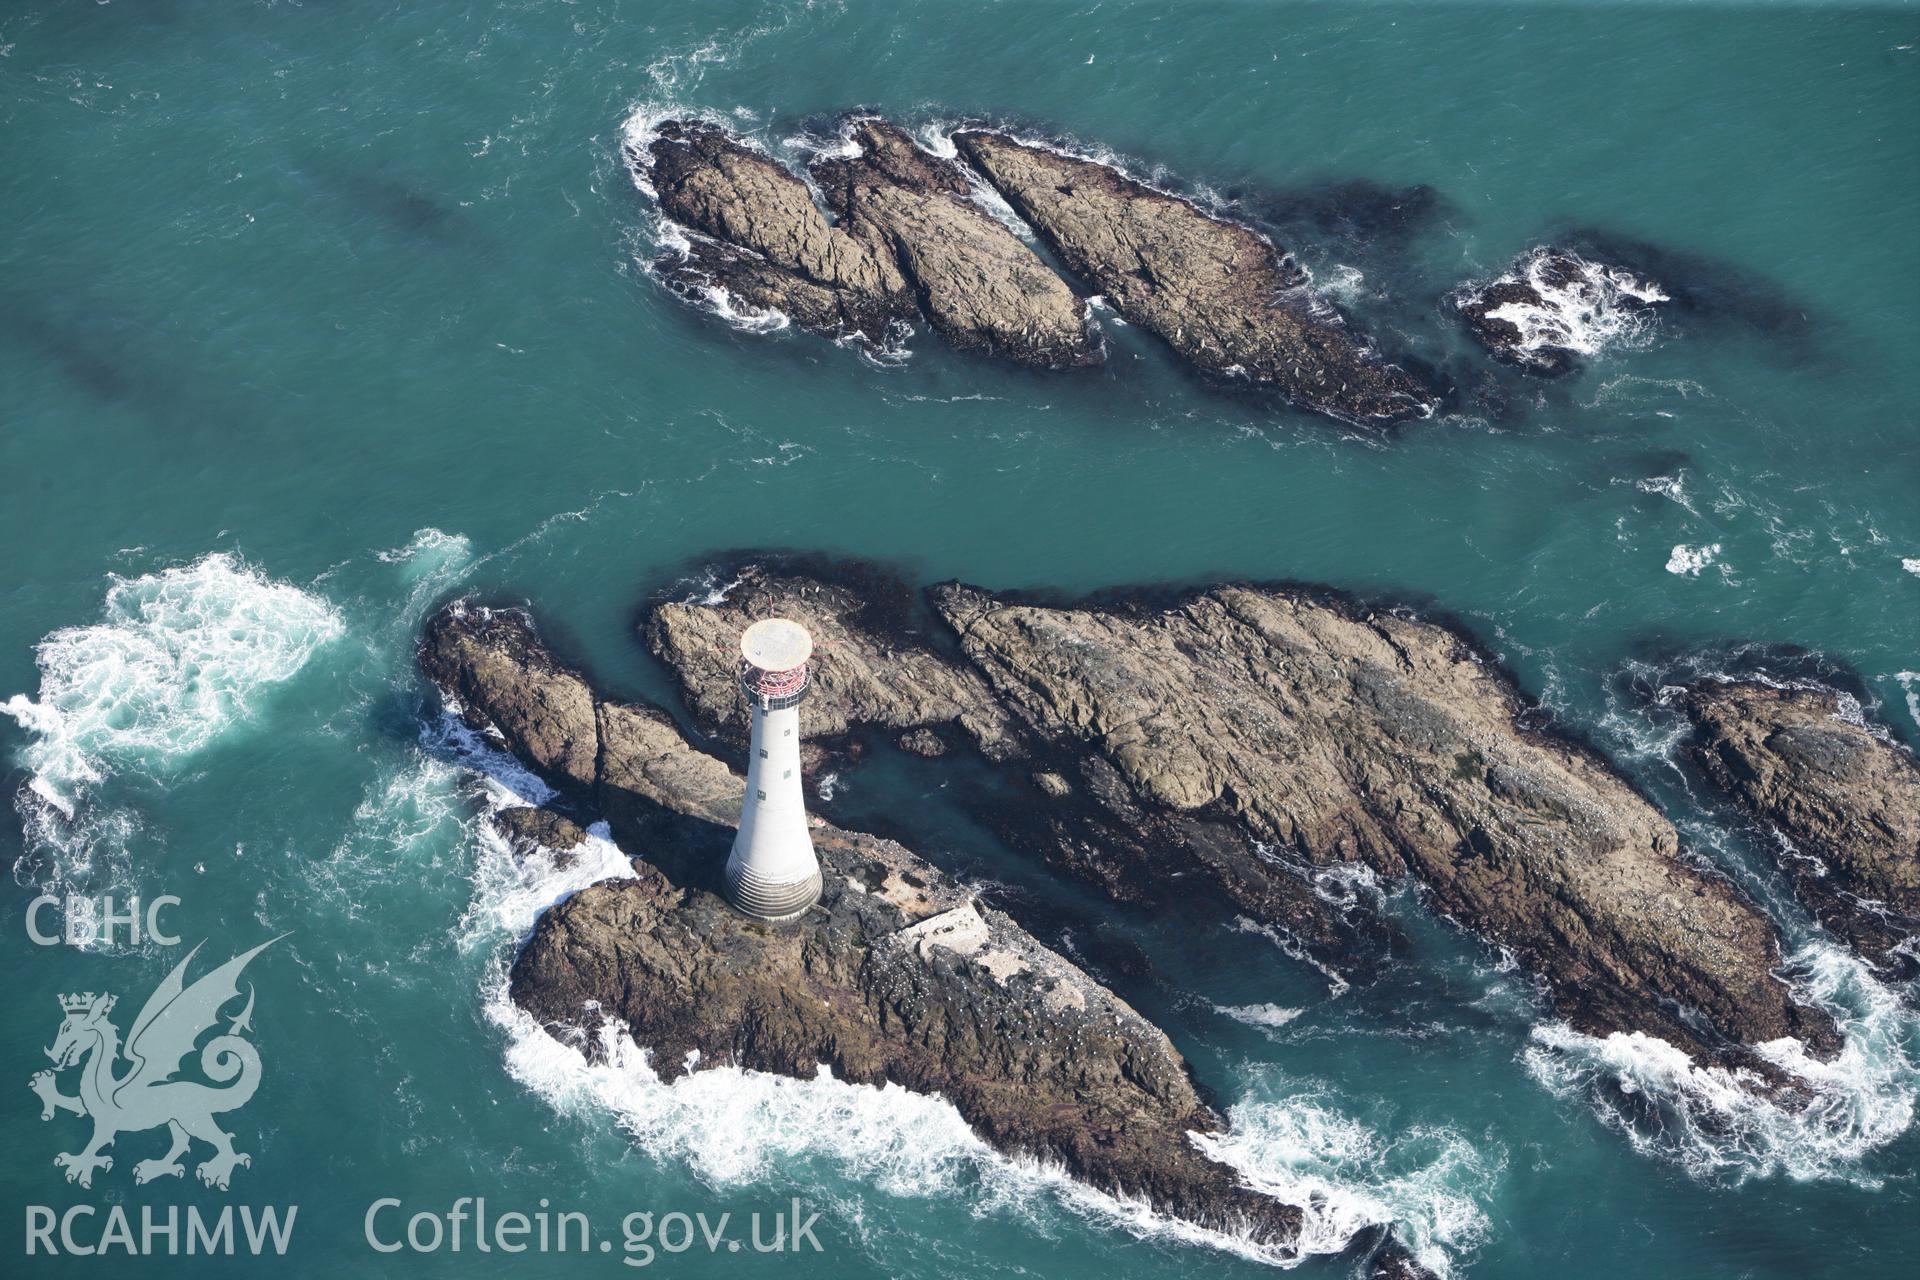 RCAHMW colour oblique photograph of The Smalls Lighthouse, west of Skomer Island. Taken by Toby Driver on 09/09/2010.